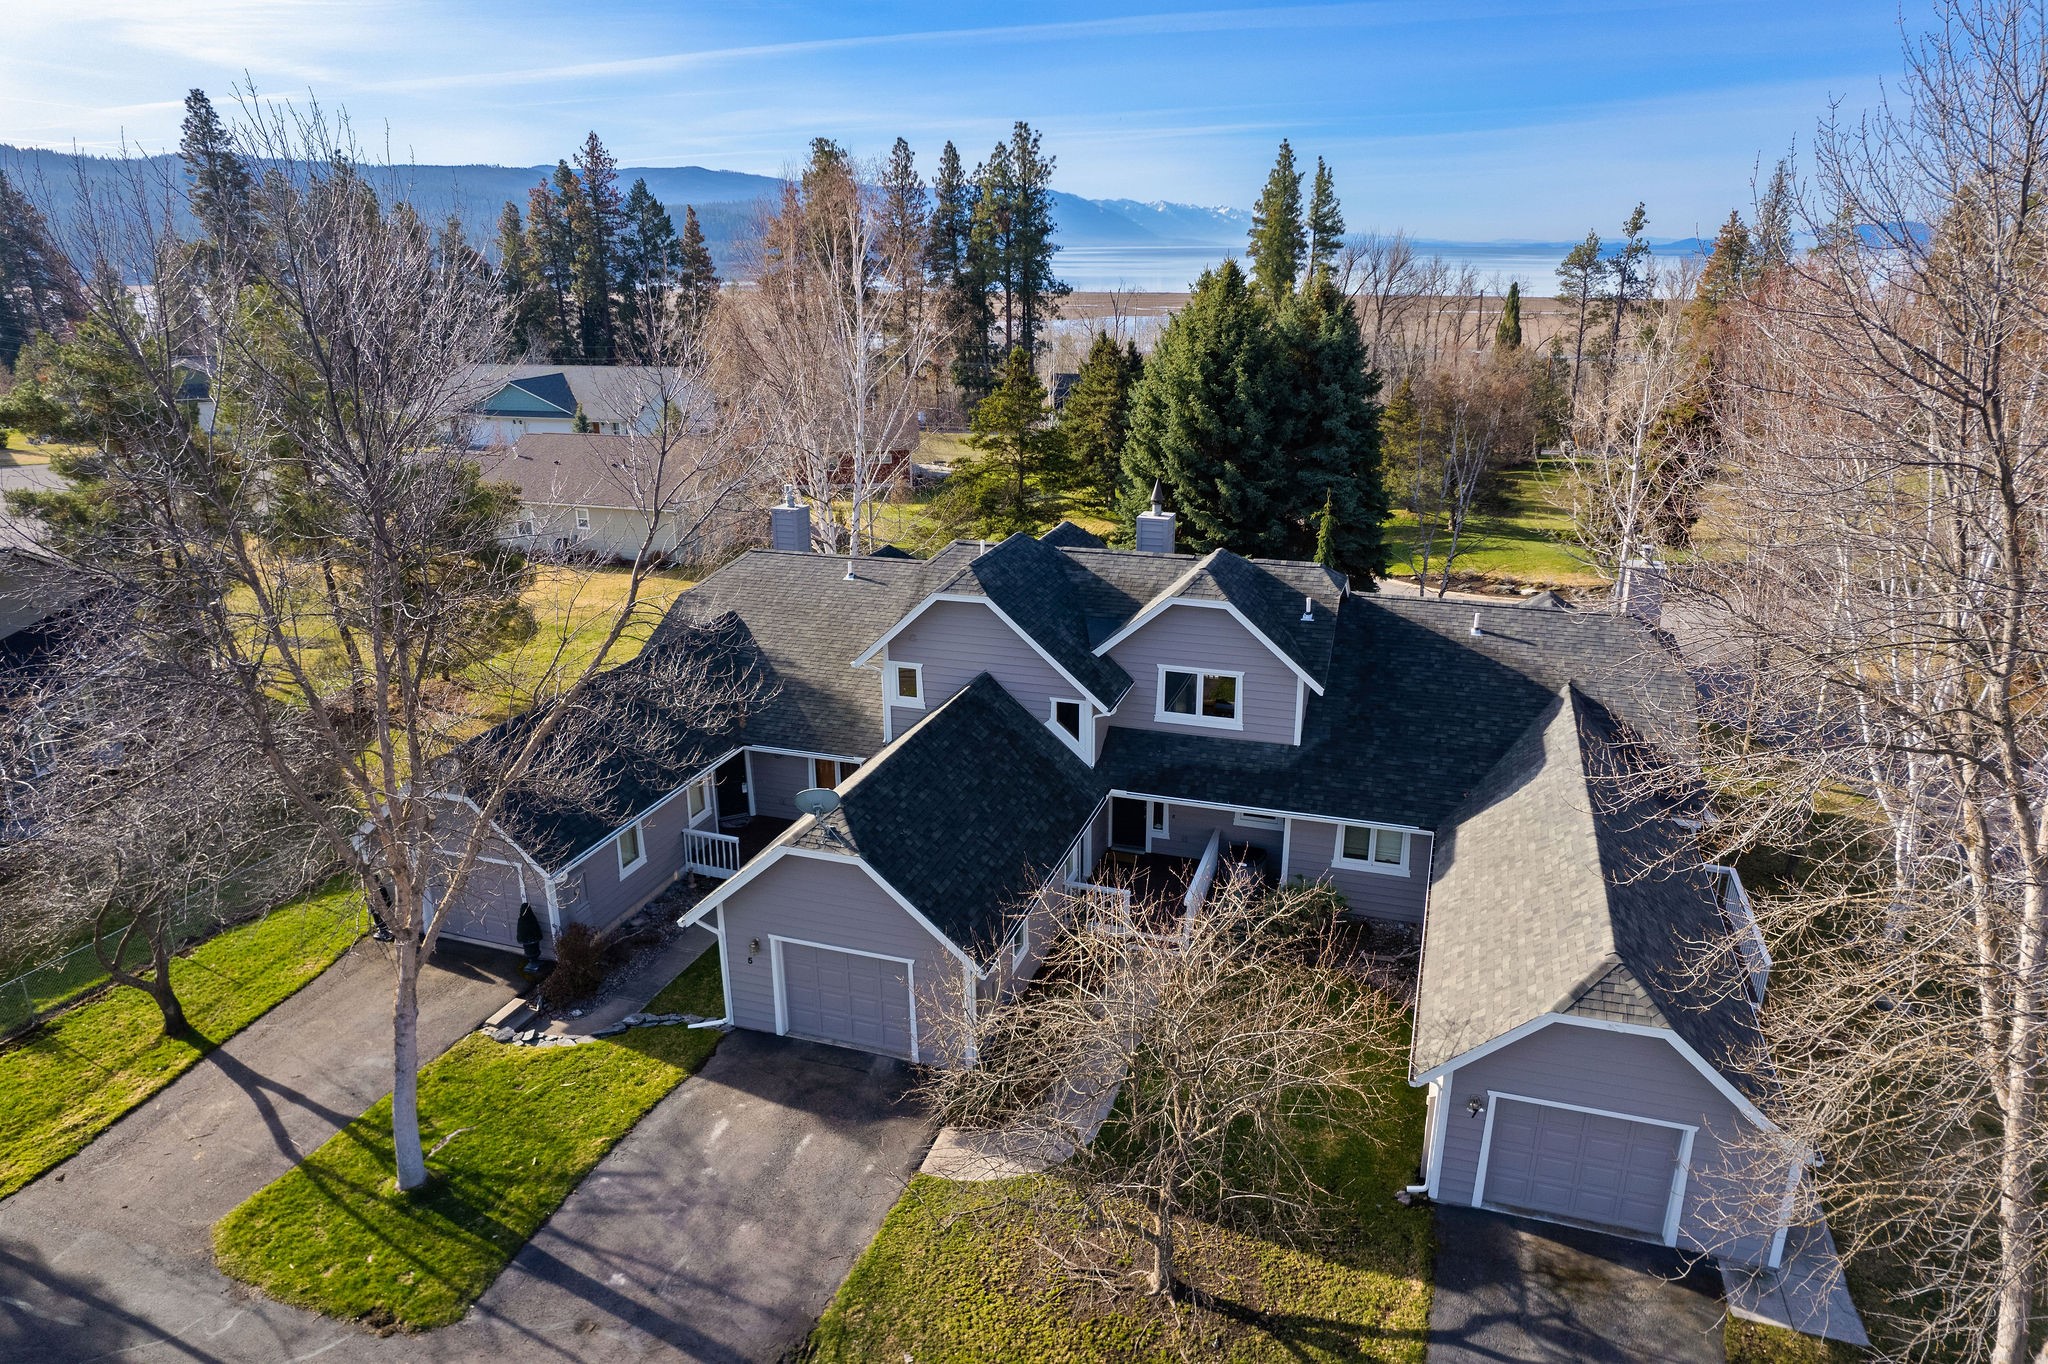 This charming townhome, located near the south end of Eagle Bend Golf Course community,  gives you a feeling of privacy as you are just off the golf course, and looks through the pines to a 'peek a boo' view of Flathead Lake. Cedar vaulted ceilings in the living room with oversized windows bringing in the light, and the rock fireplace is perfect to sit by enjoy a chilly Montana morning as you enjoy your coffee.  Spacious main floor primary bedroom/full bath with the upstairs offering a second bedroom, full bath, and open loft area currently used as a 3rd bedroom but could be a great office, work-out area, or whatever bonus space is needed.  The kitchen has granite counters, and opens to the dining and living area.  You can relax on the deck off living or the one off the upstairs bedroom.  Most furnishings and kitchen items remain so easy to move right in in time to enjoy the summer season.  Close to lake access, downtown Bigfork, MAC and golf course. Pinehurst HOA managed by Western Mountains Property Management.  Pinehurst Quarterly dues of $900.00/no transfer fee. Pinehurst covers landscaping and groundskeeping, irrigation, tree care, repairs and maintenance for buildings, gutters and painting.

Eagle Bend HOA managed by Montana Community Management Corp - Semi-annual dues of $457.00 which covers roadways, recreation areas. Maintains common areas.
$75 administrative fee at closing and a transfer fee of $229.

These Dues are subject to change.  Check with HOA management to verify.
For any short-term rental information, it is recommended you verify with Flathead Planning and Zoning and with HOA, as well. The current Conditional Use Permit for Short Term rentals would have to be re-applied for by a new owner.